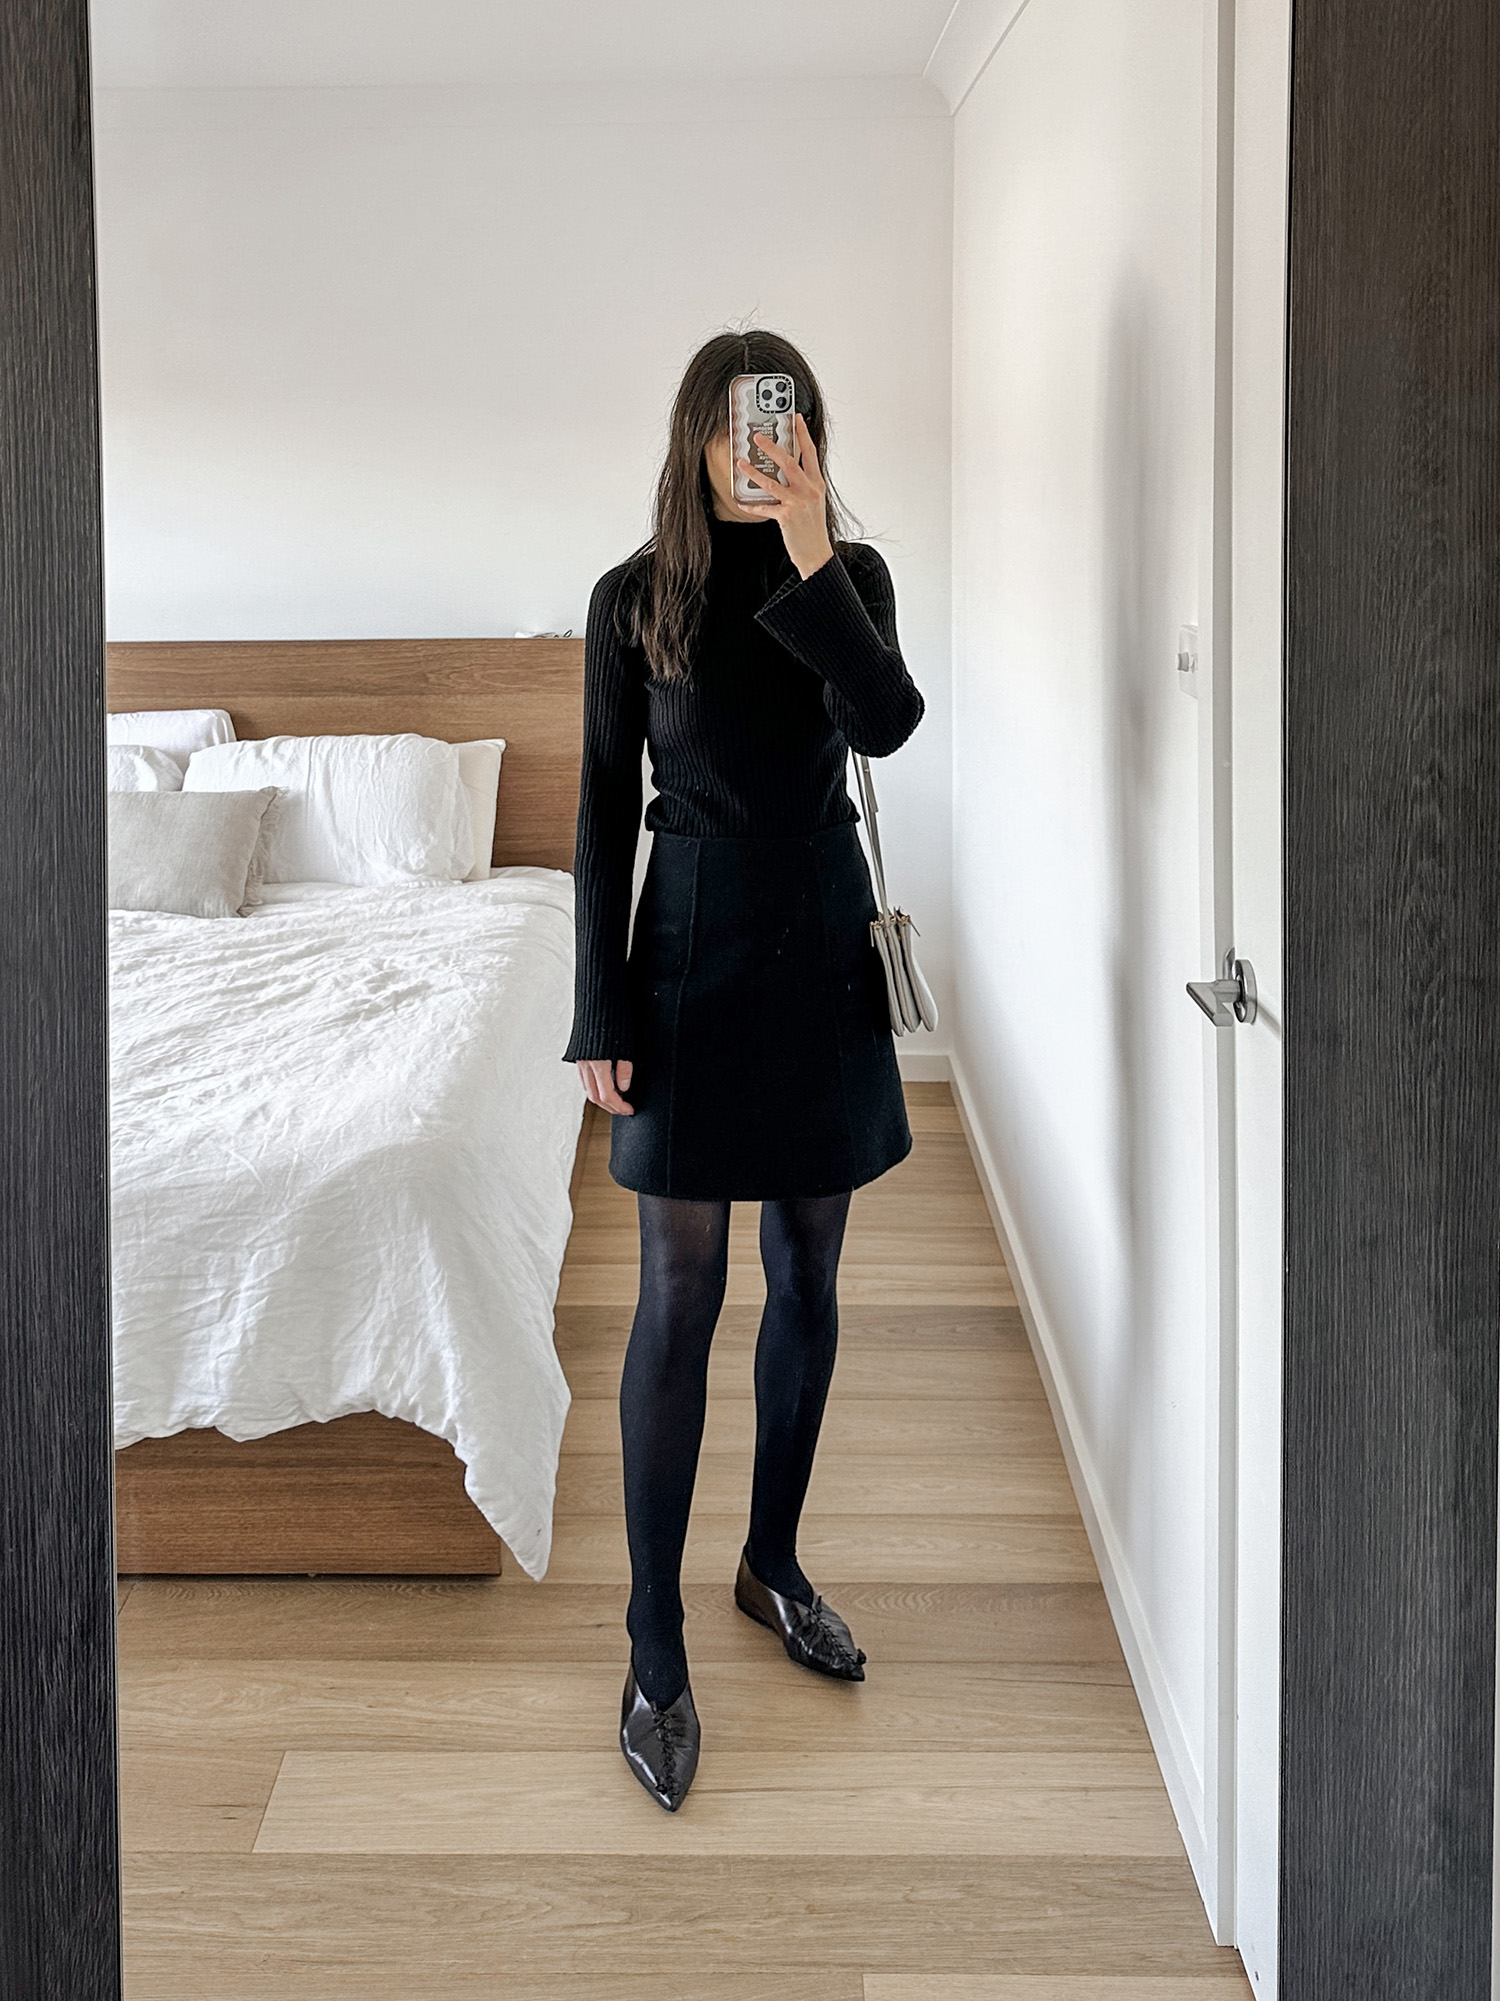 A week of early winter outfit ideas - Mademoiselle